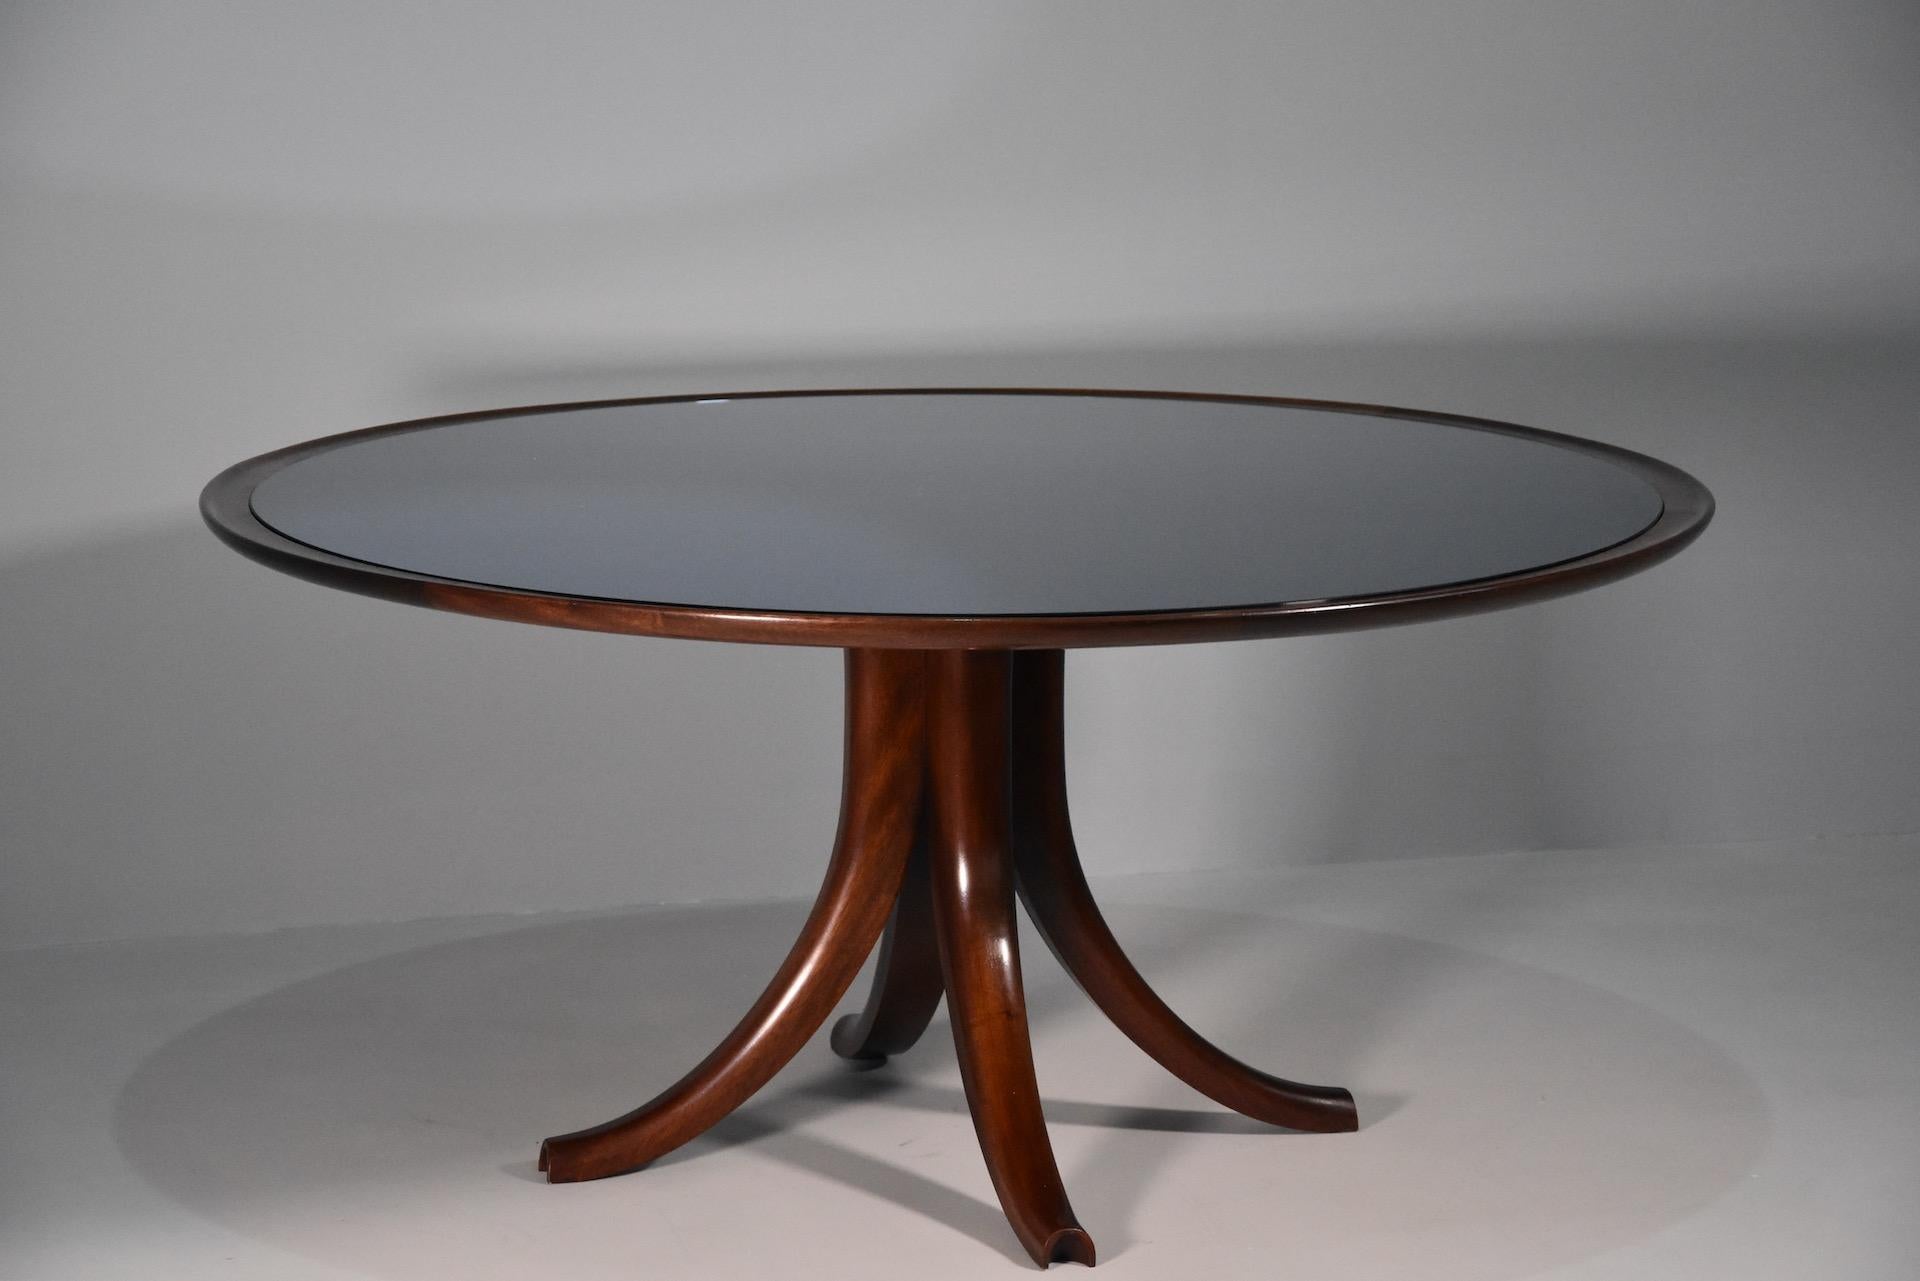 Wood Rare Variant of Big Table Pietro Chiesa for Fontana Arte 1940 Whit Blue Mirror For Sale